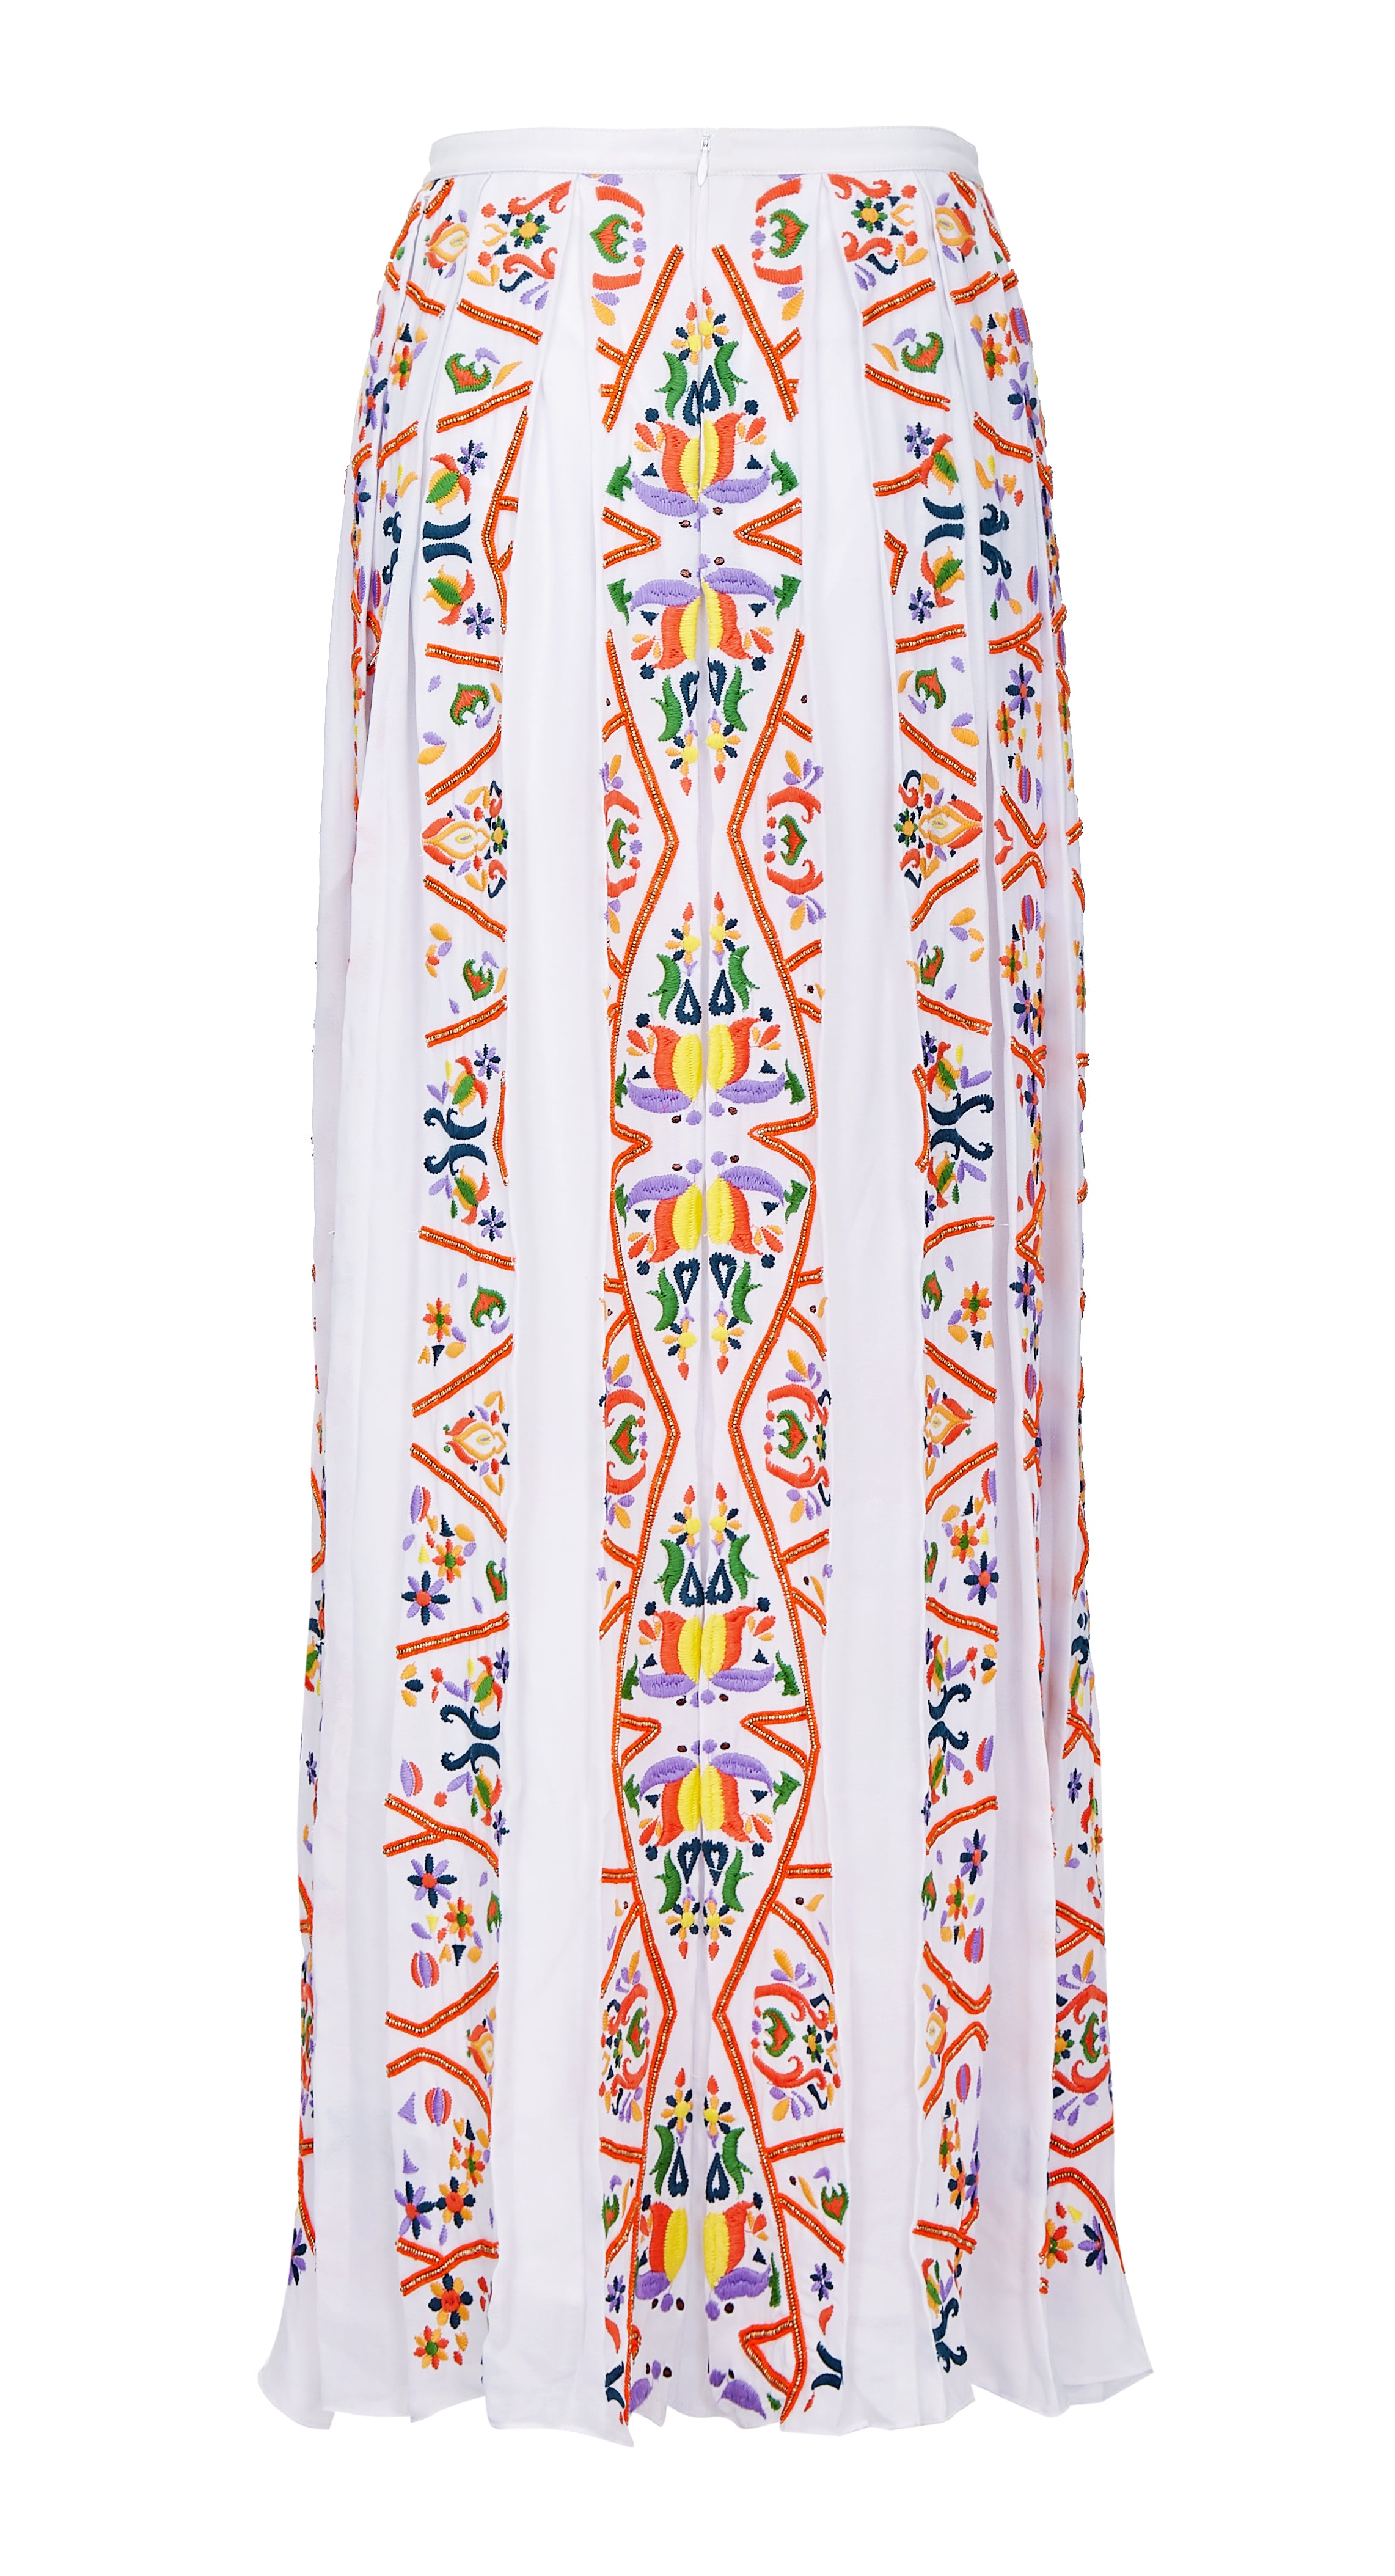 Back view of white maxi box pleat skirt with colorful embellishment detail